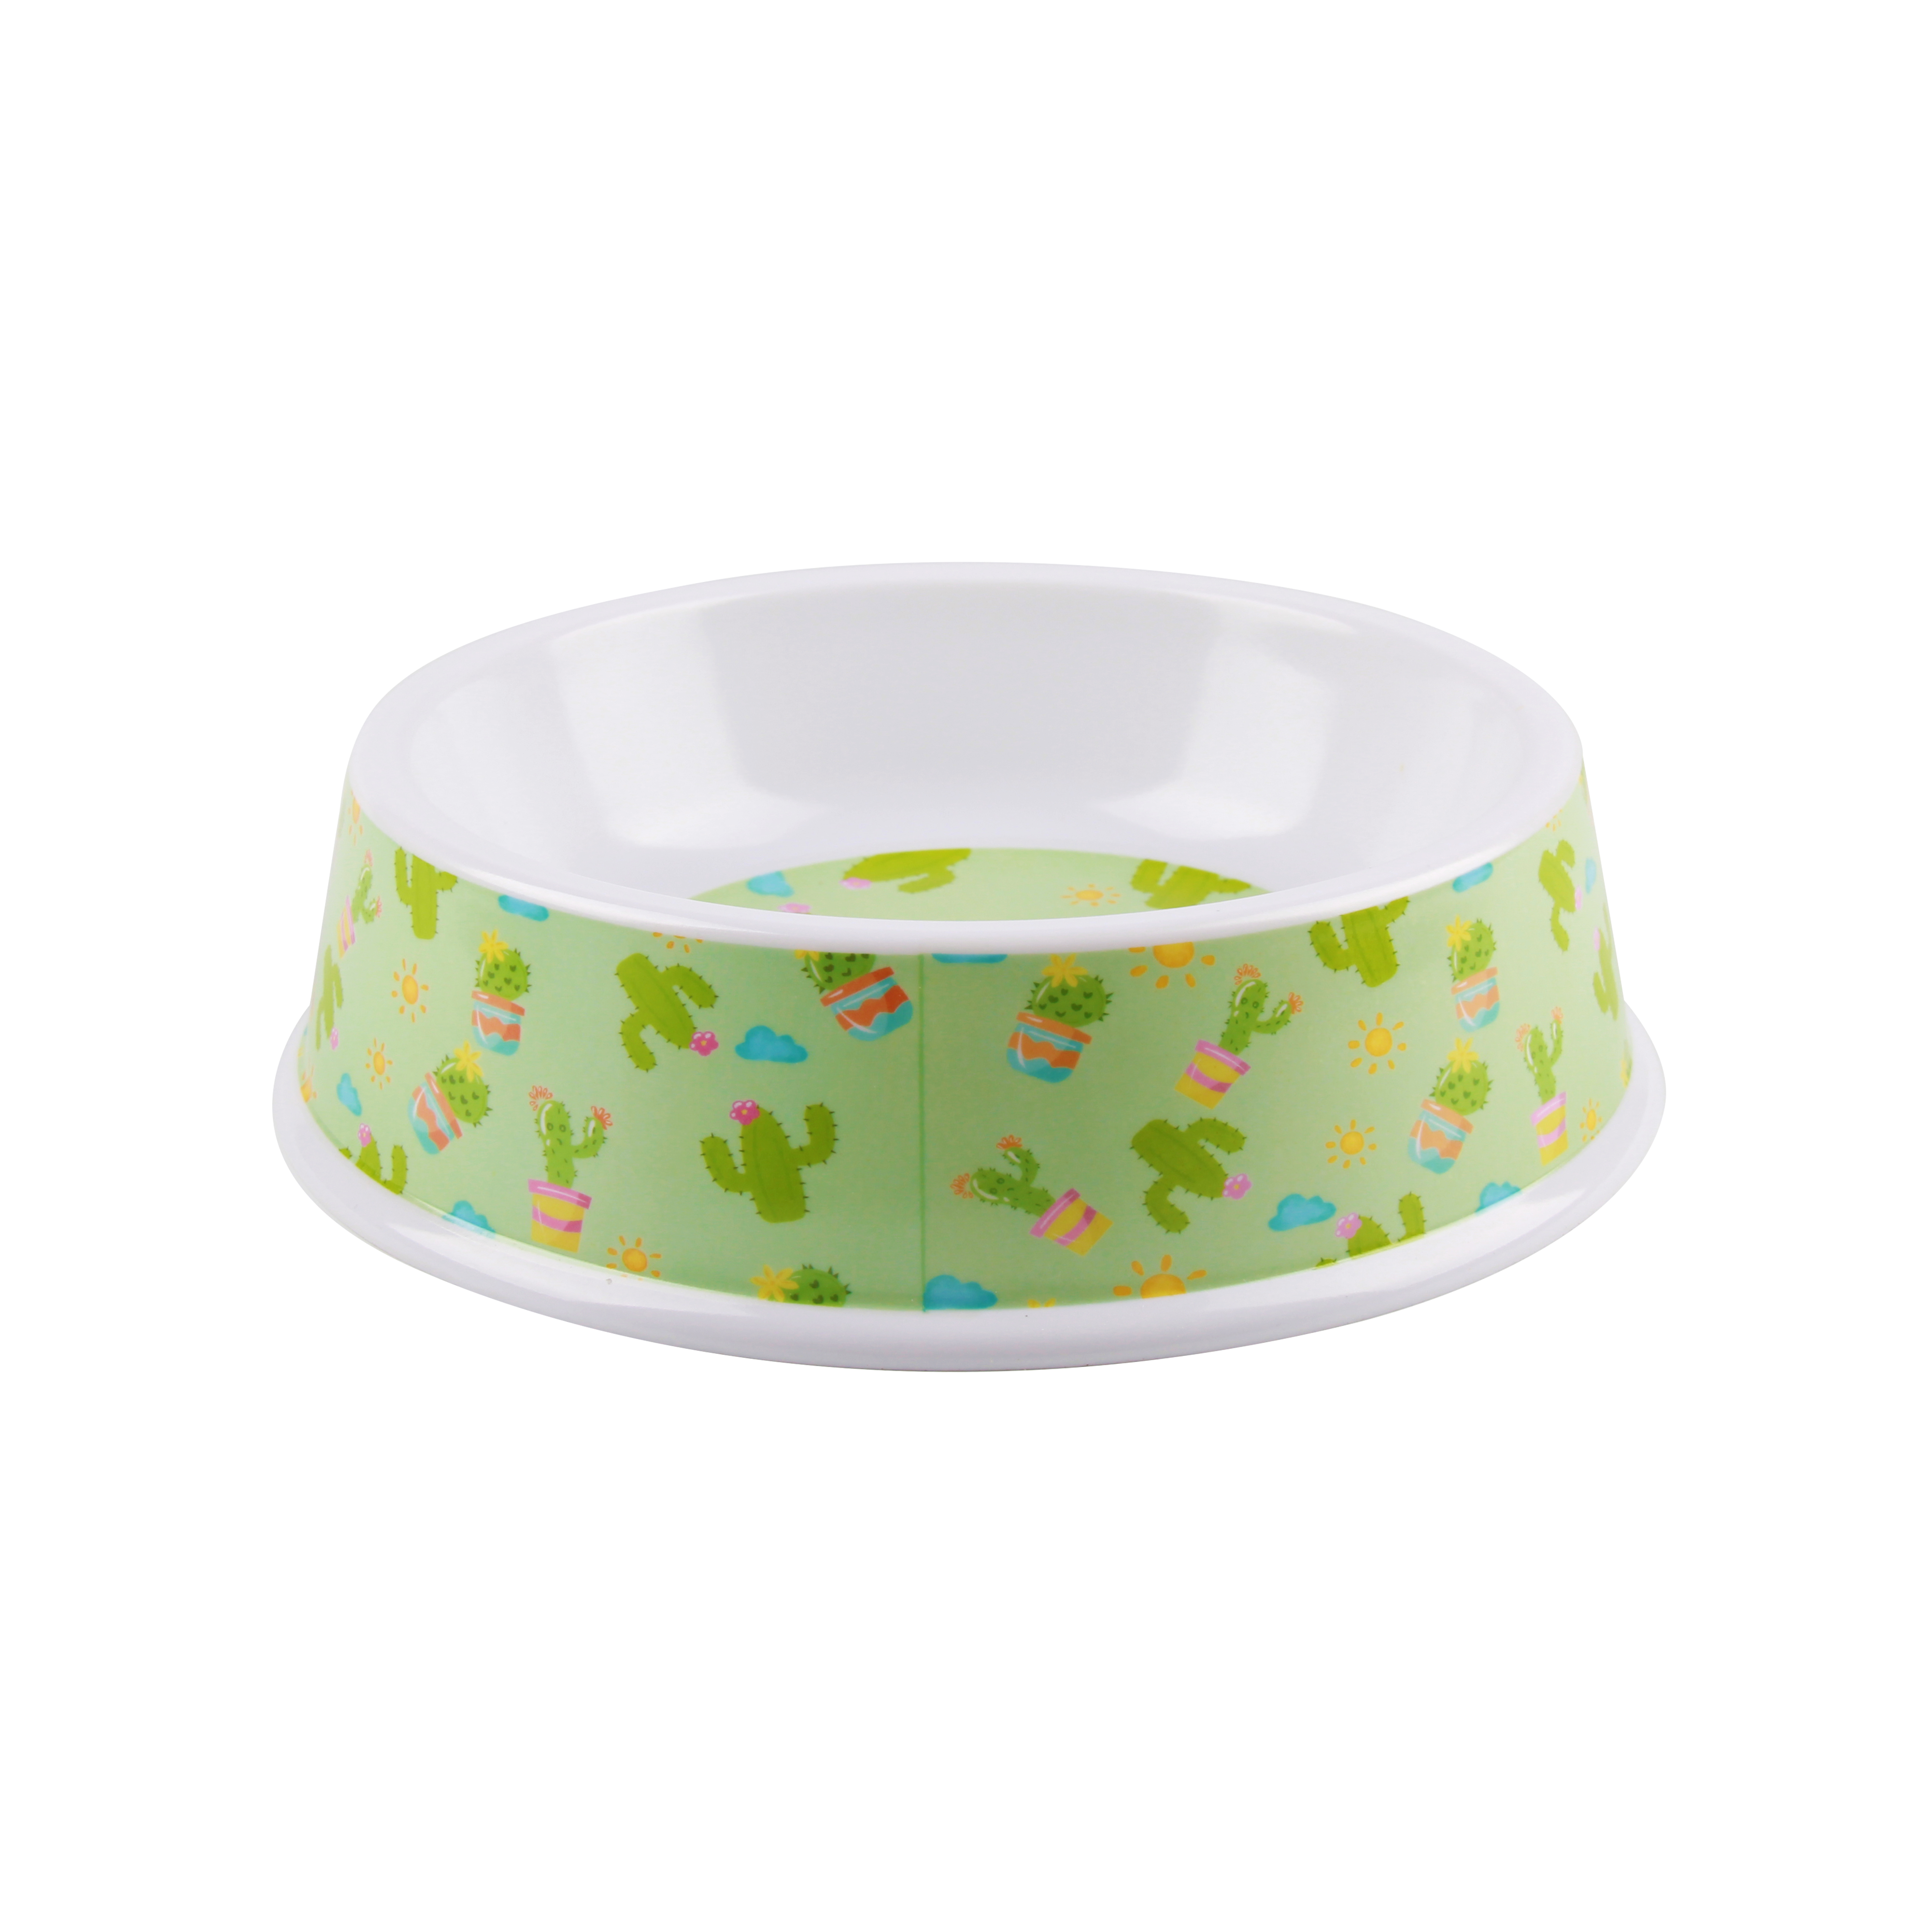 Factory best selling Market Agency Guangzhou - Pattern Melamine Pet Bowl Wholesale from China 2021 – Sellers Union